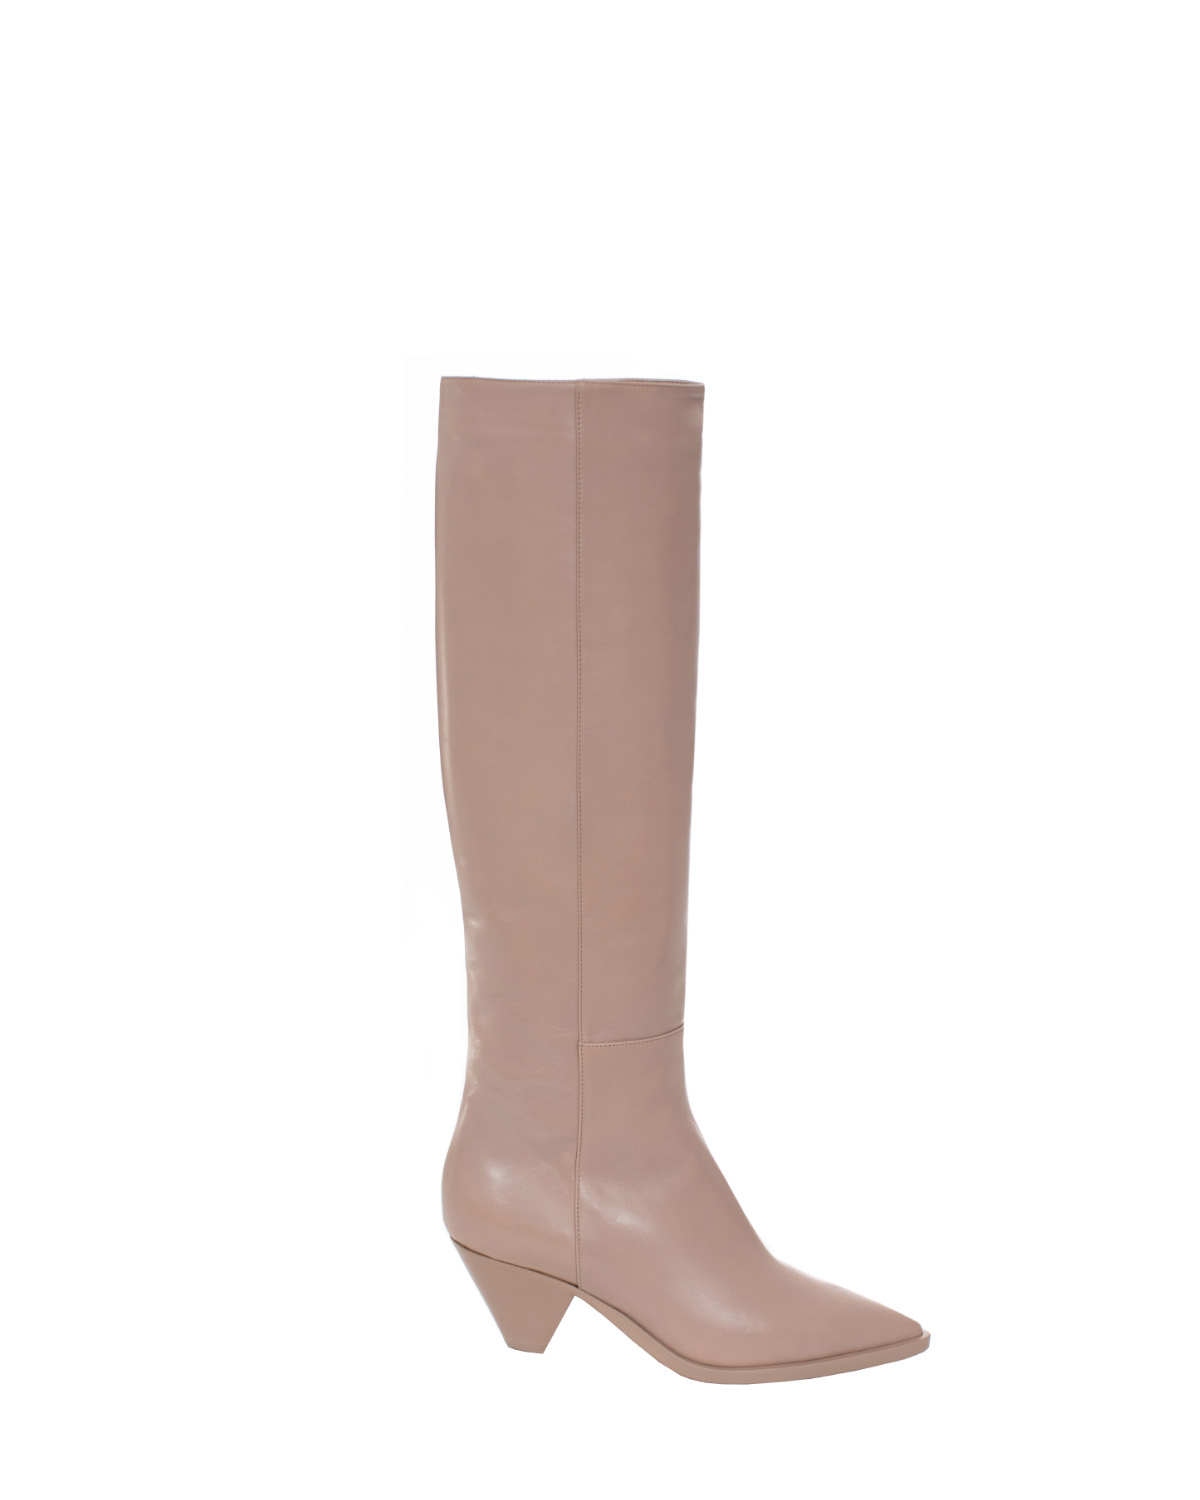 Knee Cowboy nude leather boots | Sale, -30% | Genny